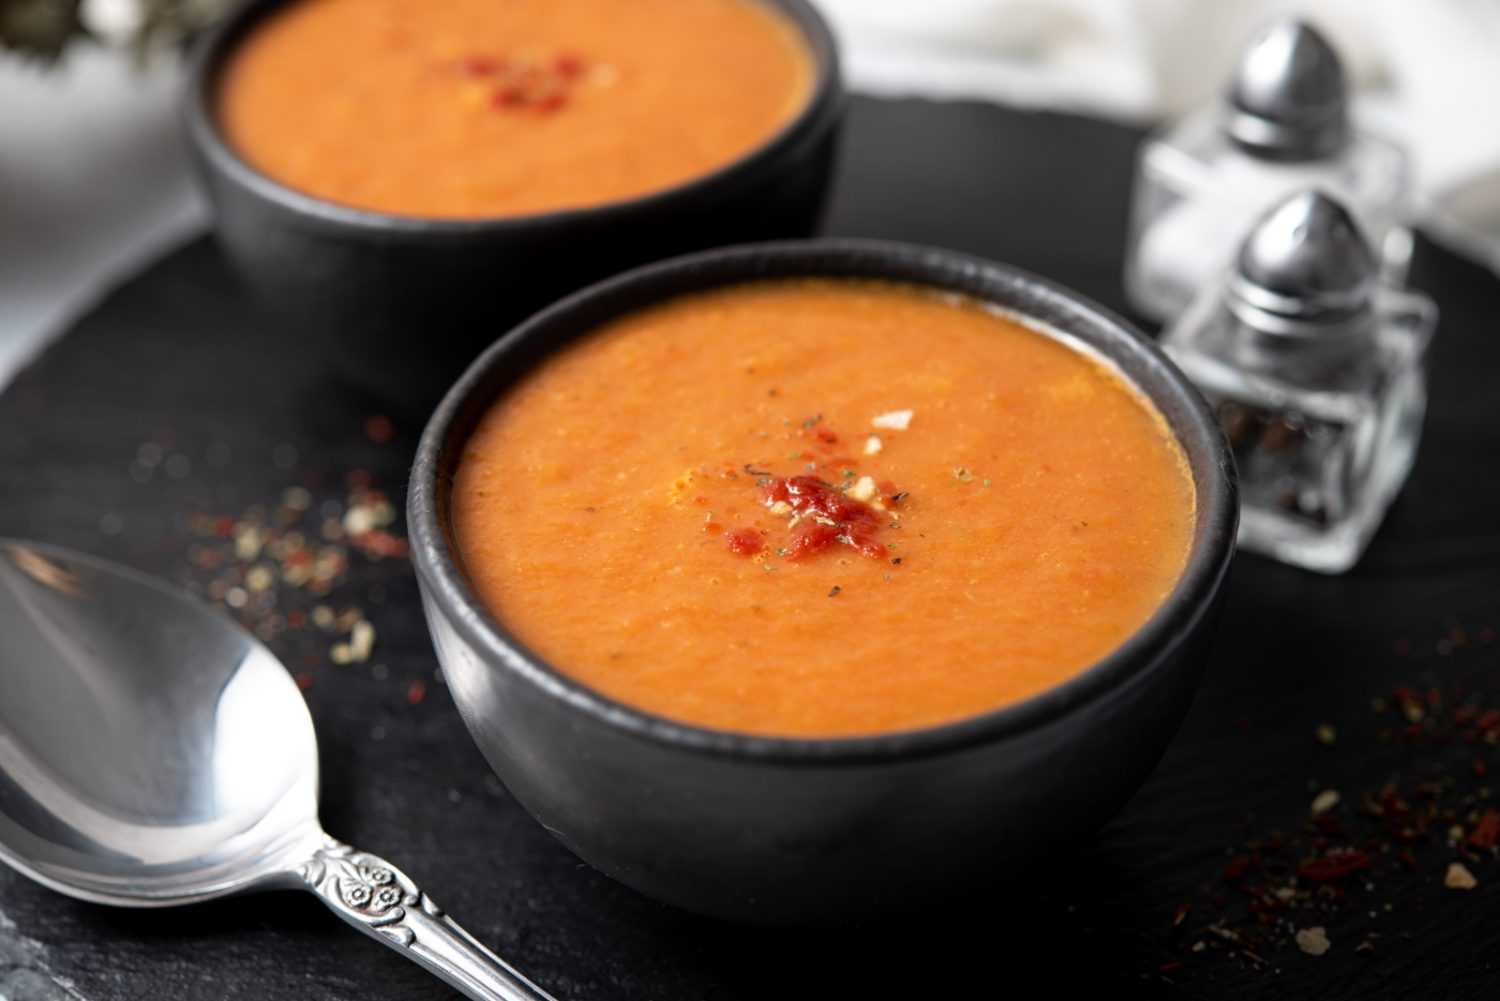 Blended tomato soup in two bowls topped with spices